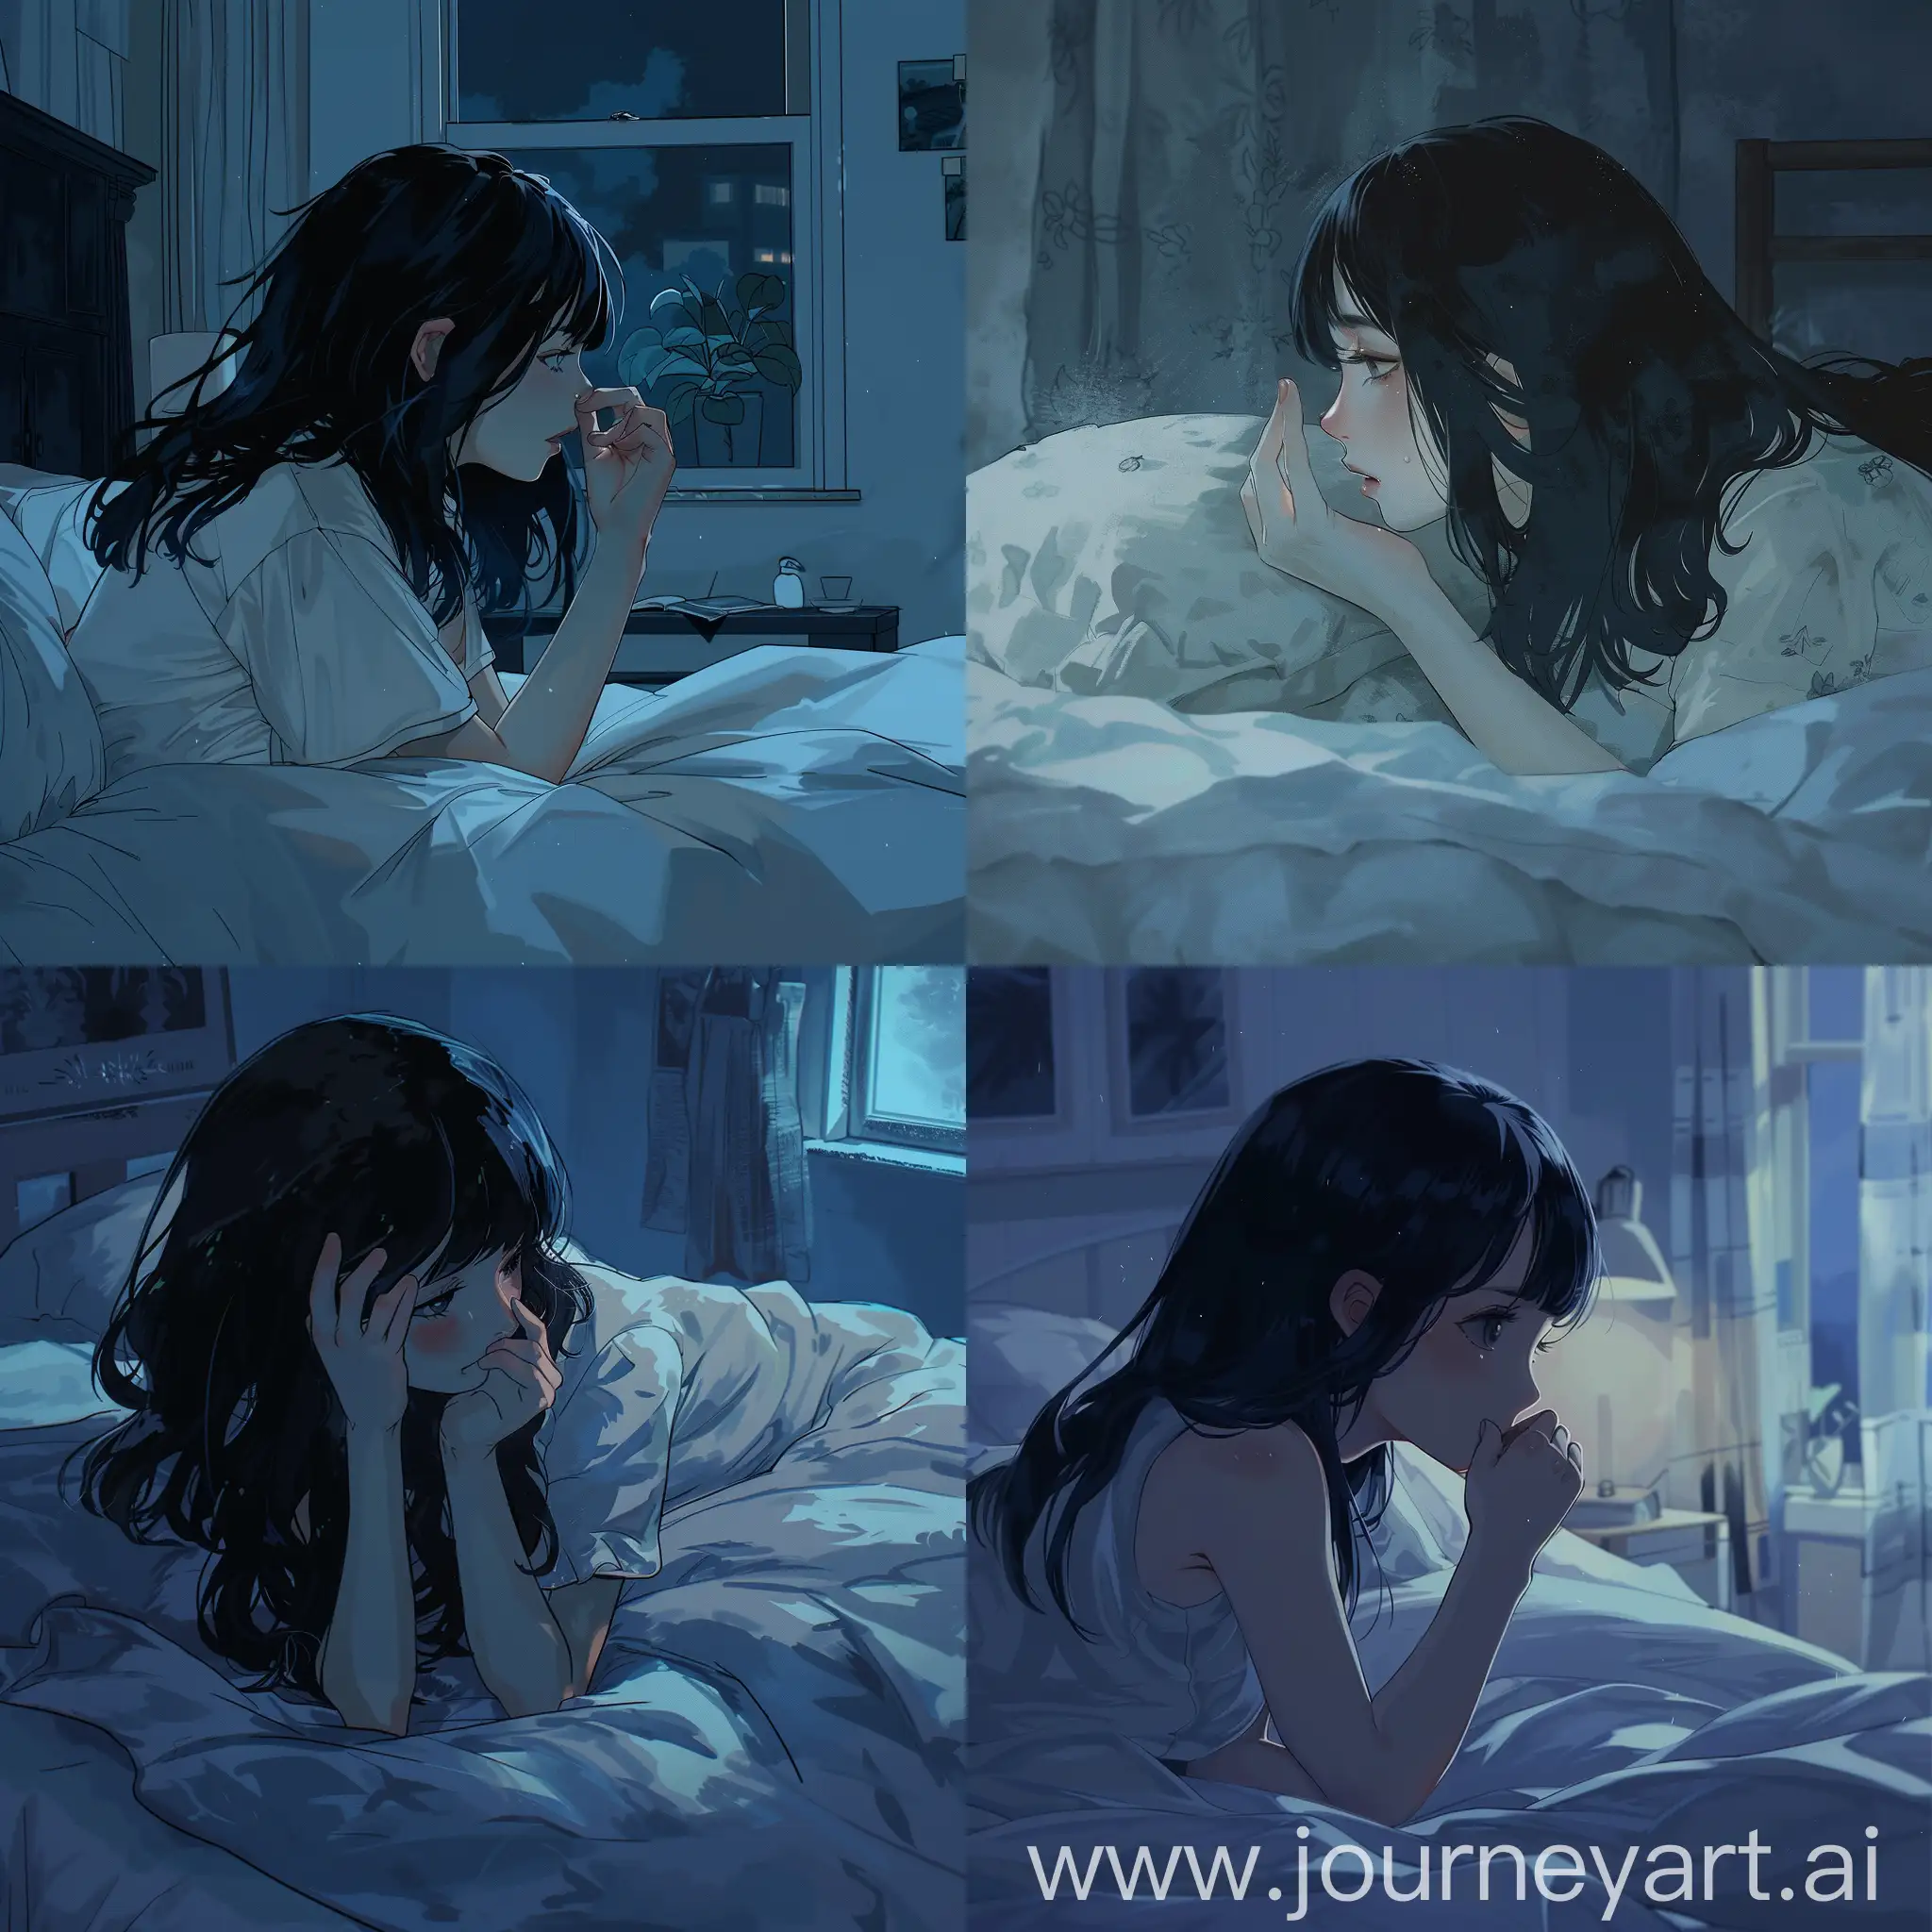 The girl on the bed at night touches the end of her nose. The hair is black.